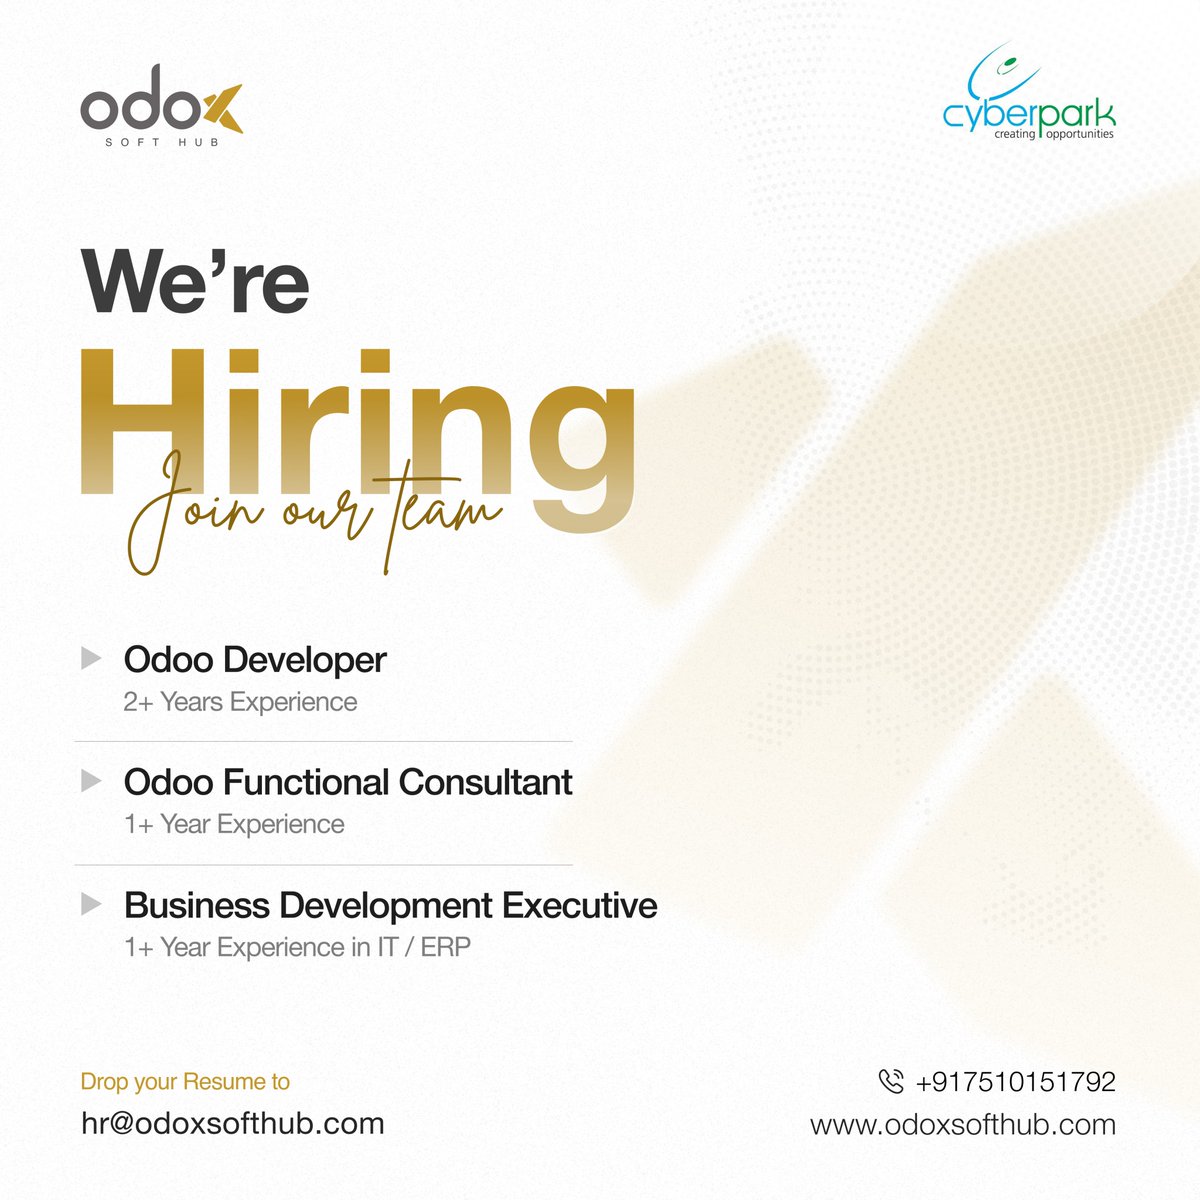 Come Join With Us 🤍
Apply now 📩 hr@odoxsofthub.com
Job Location: Cyberpark, Kozhikode
For more info, visit: odoxsofthub.com
#wearehiring #getintouchnow #hiring #jobvacancy2024 #odoo #openpositions #jobopportunity #FunctionalConsultant #hiringdeveloper #marketing